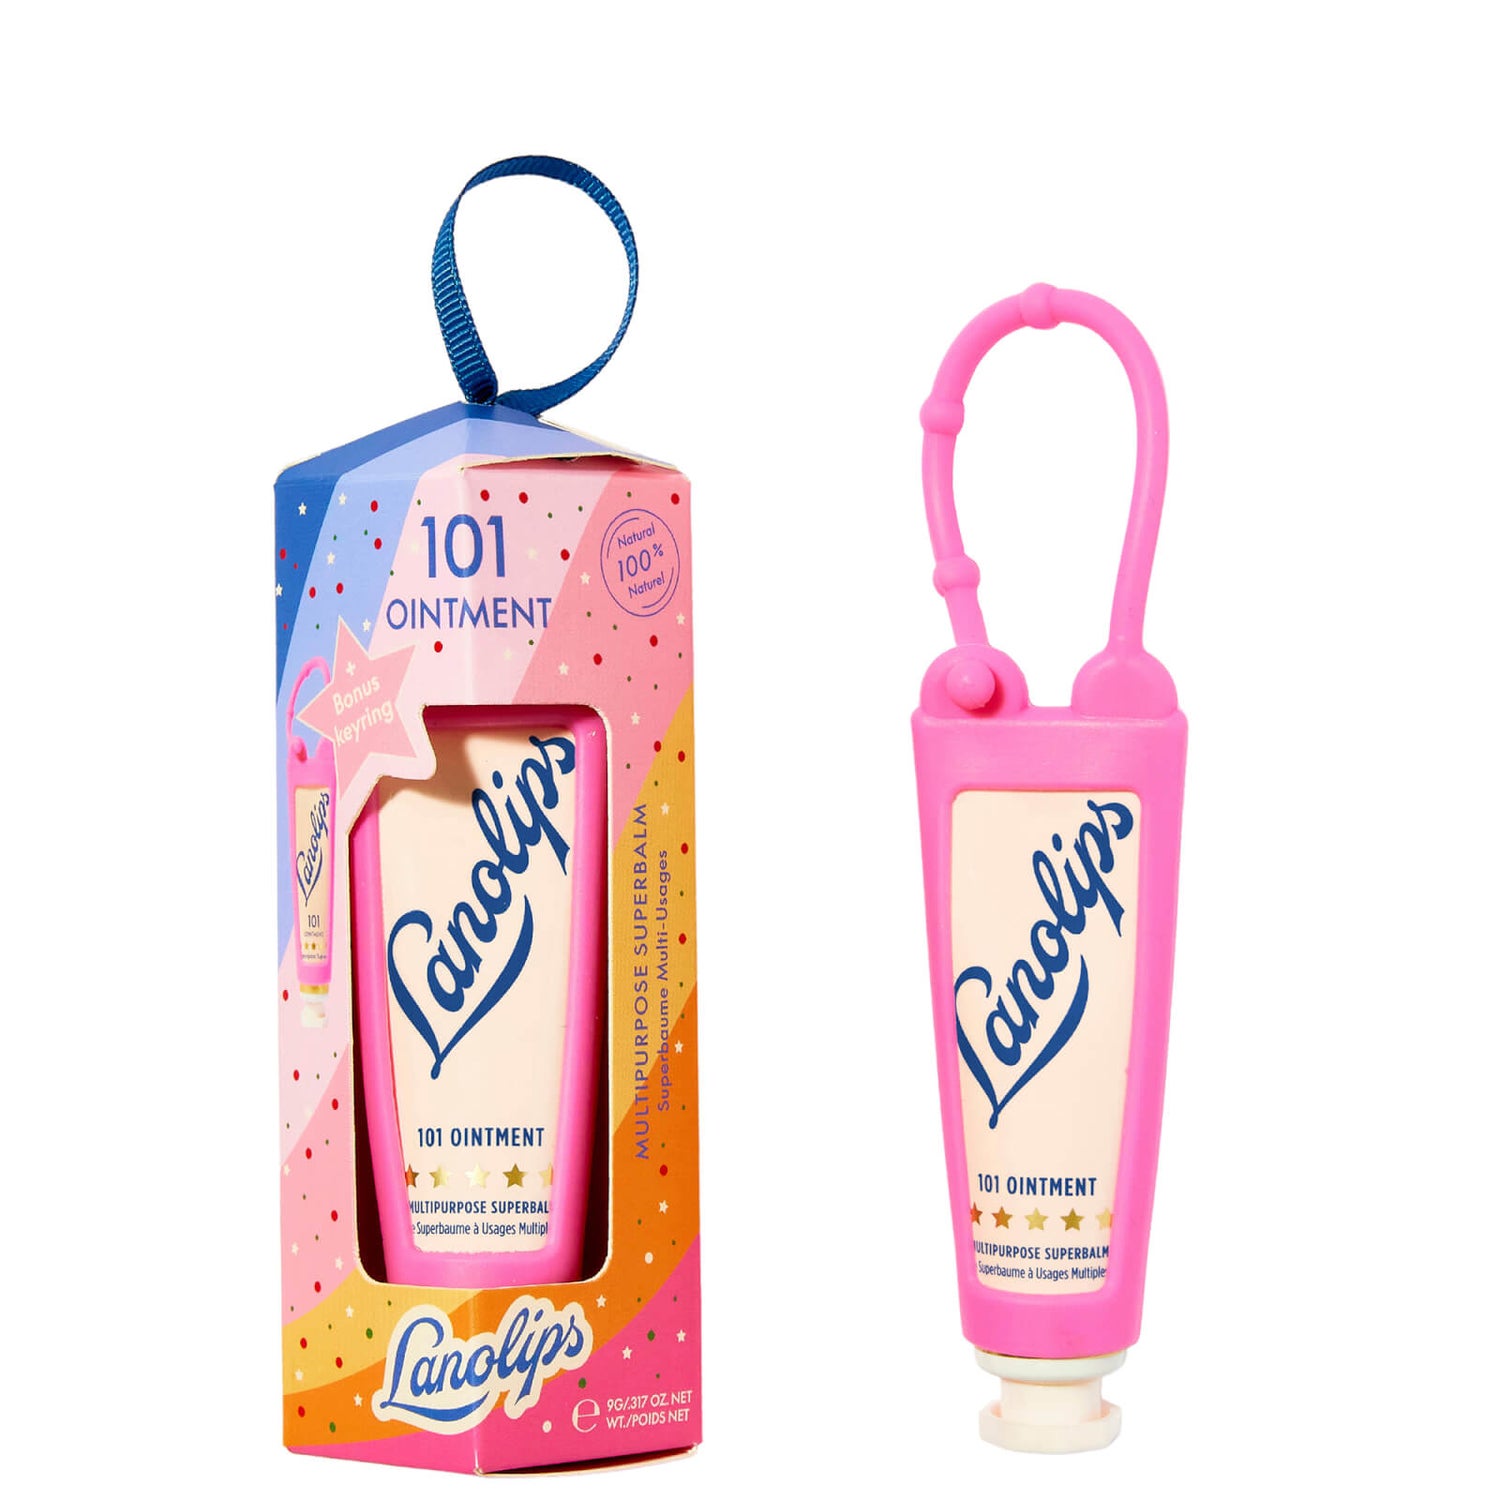 Lanolips 101 Ointment Key Ring Bauble